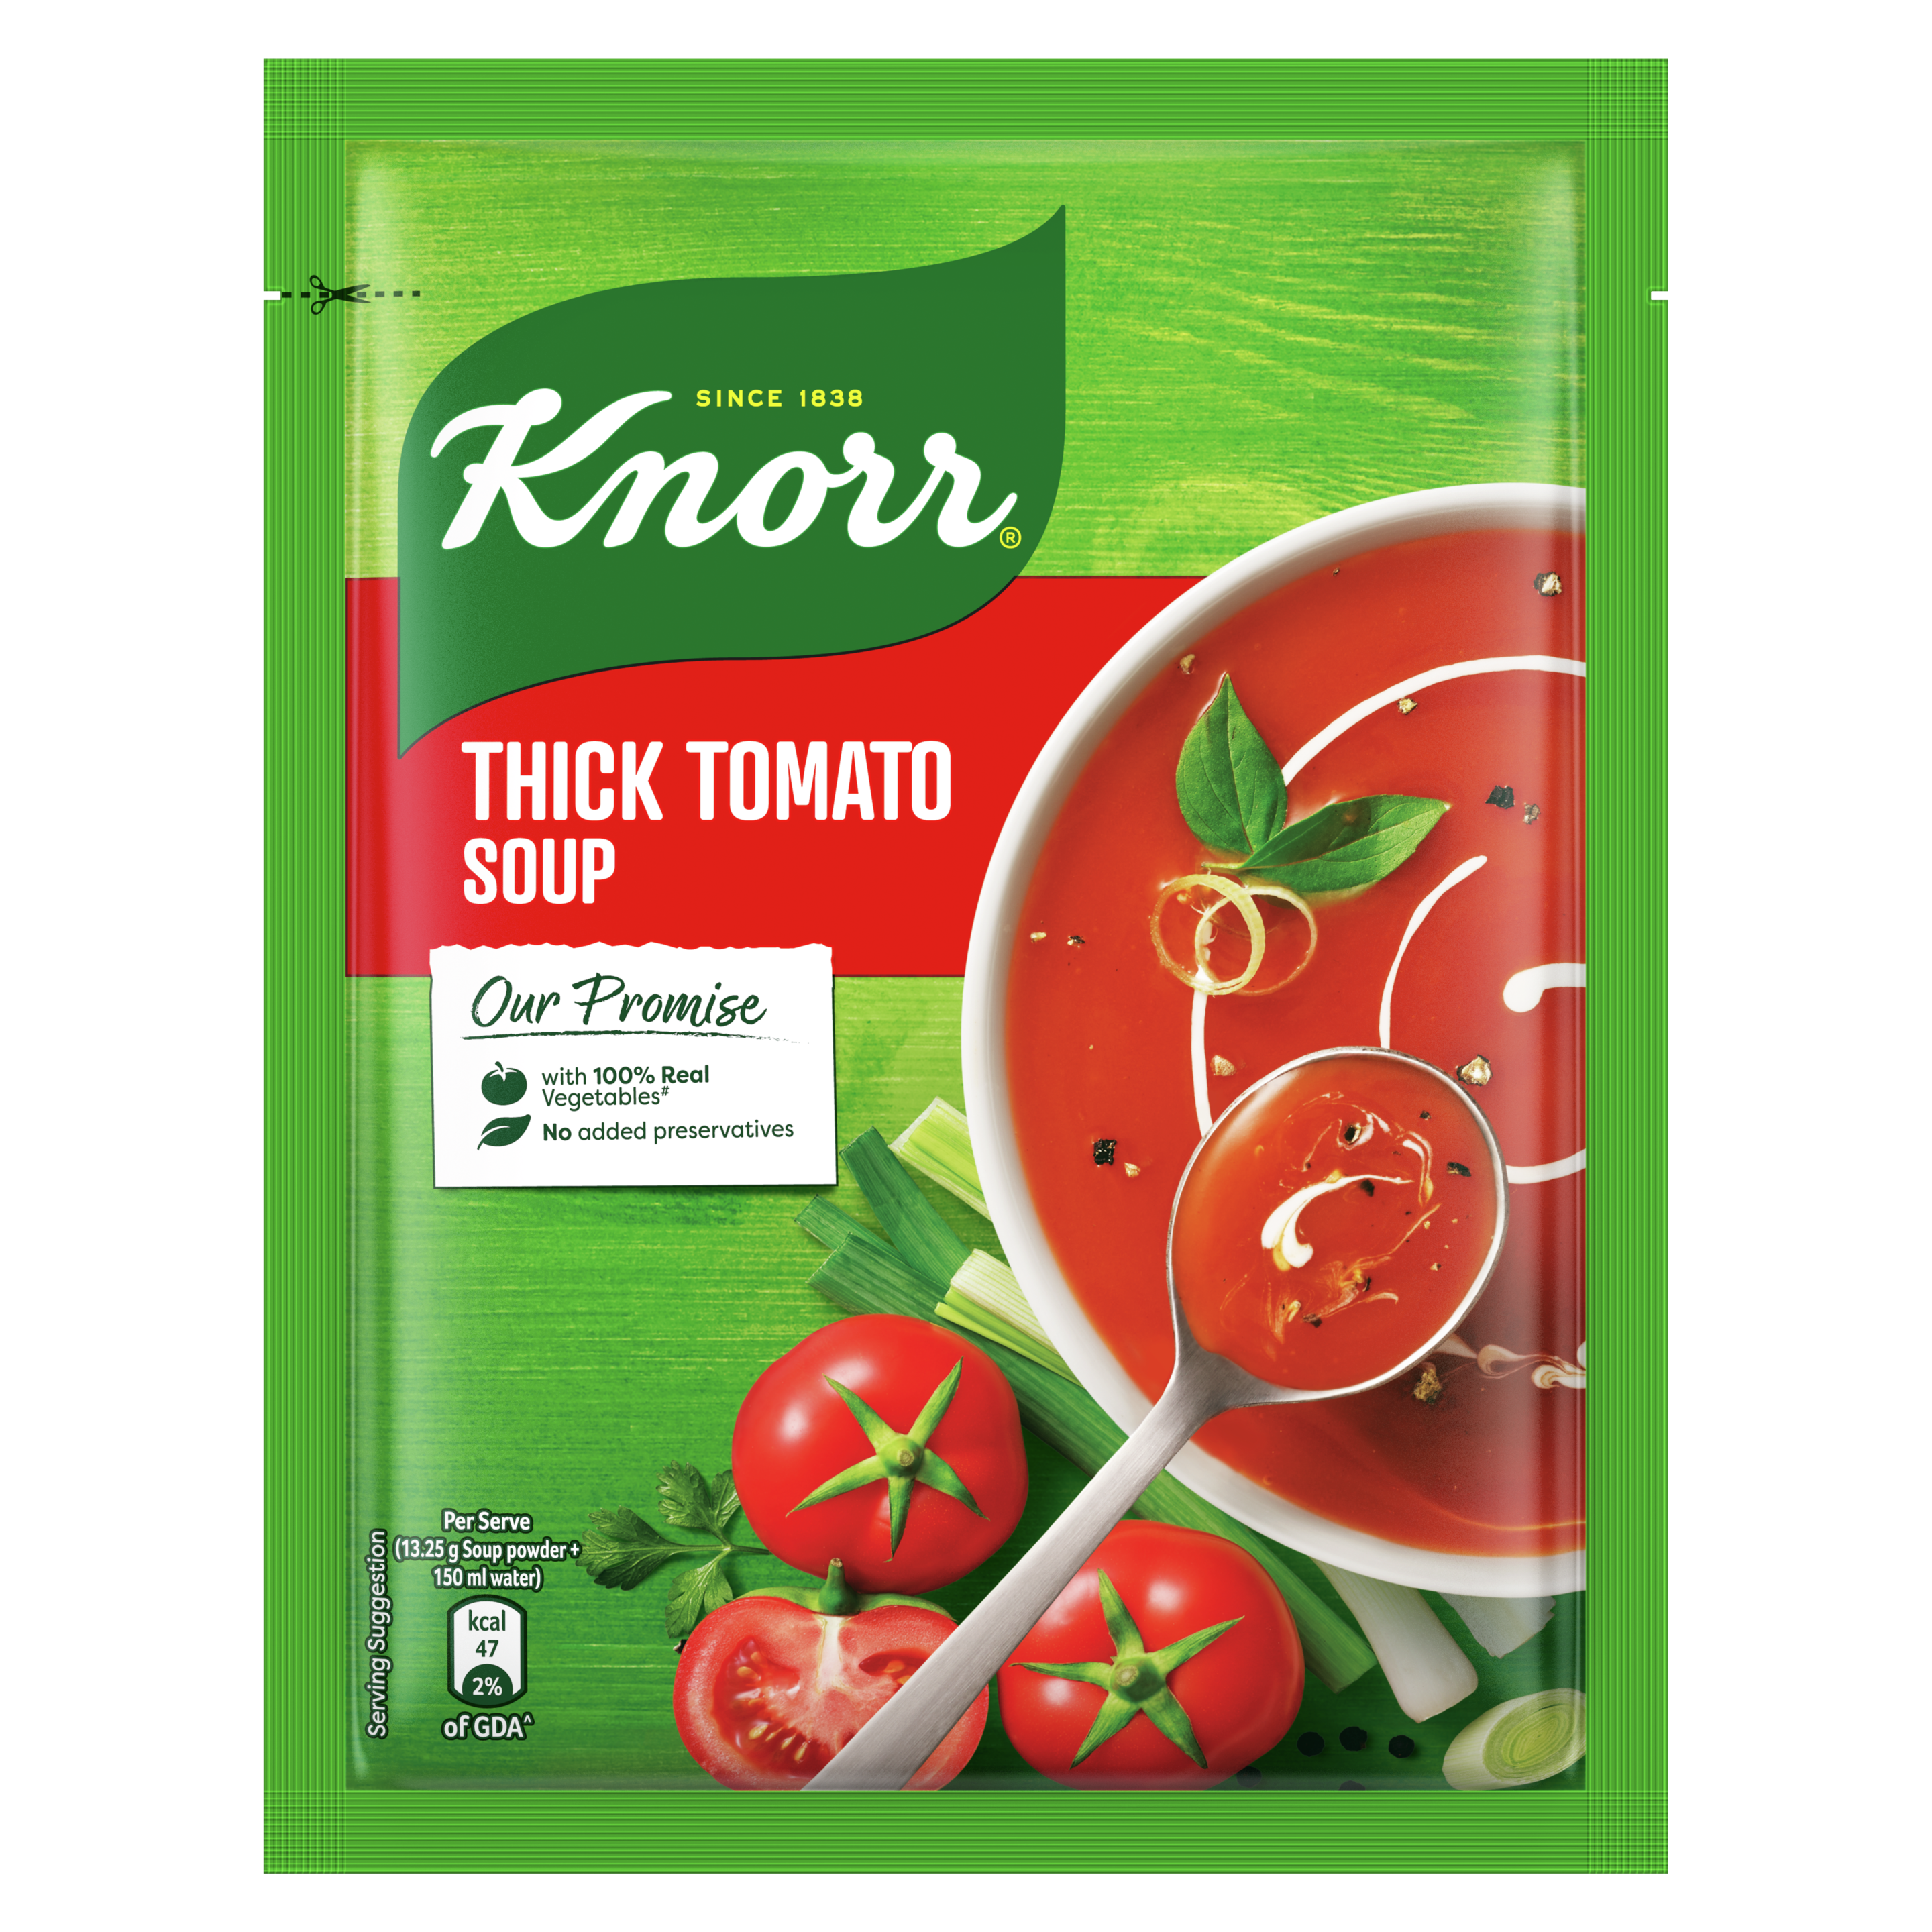 Knorr Soups